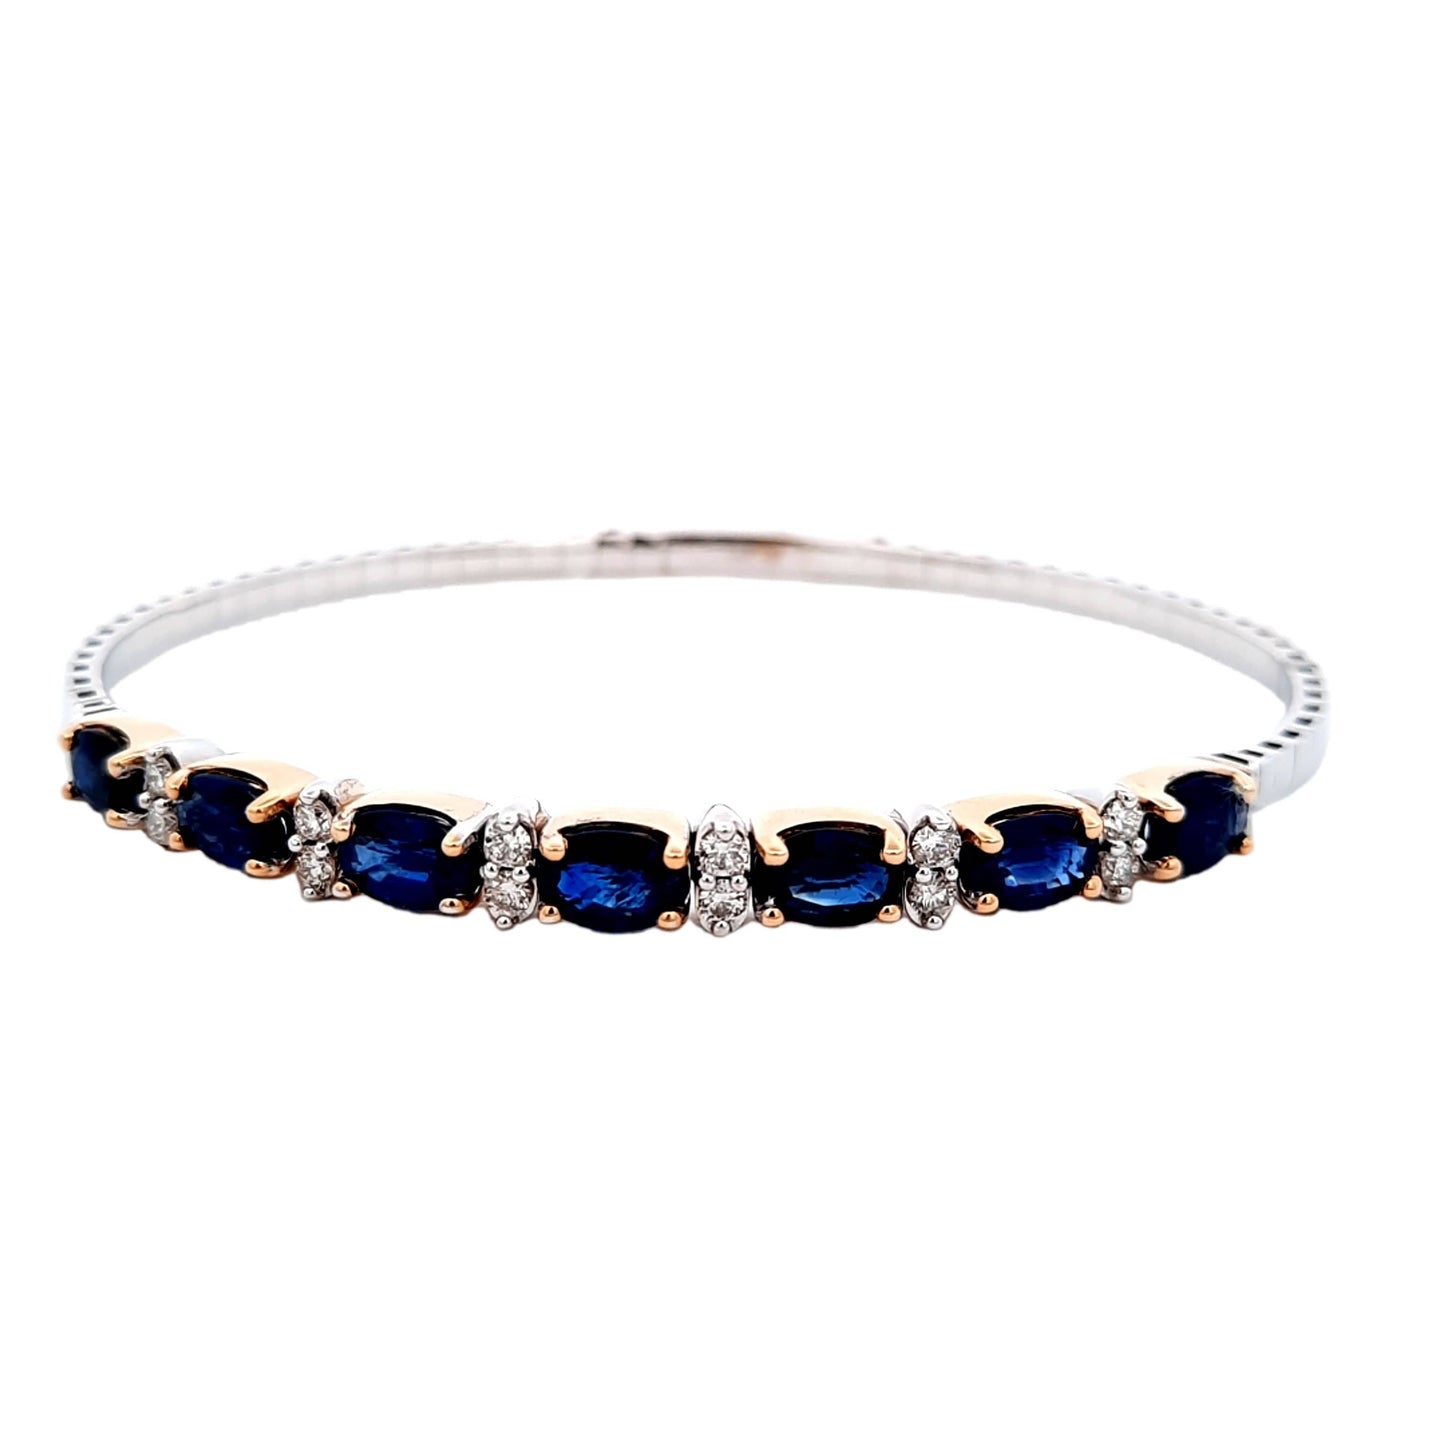 Mountz Collection Sapphire and Diamond Flexible Bangle in 14K White and Yellow Gold